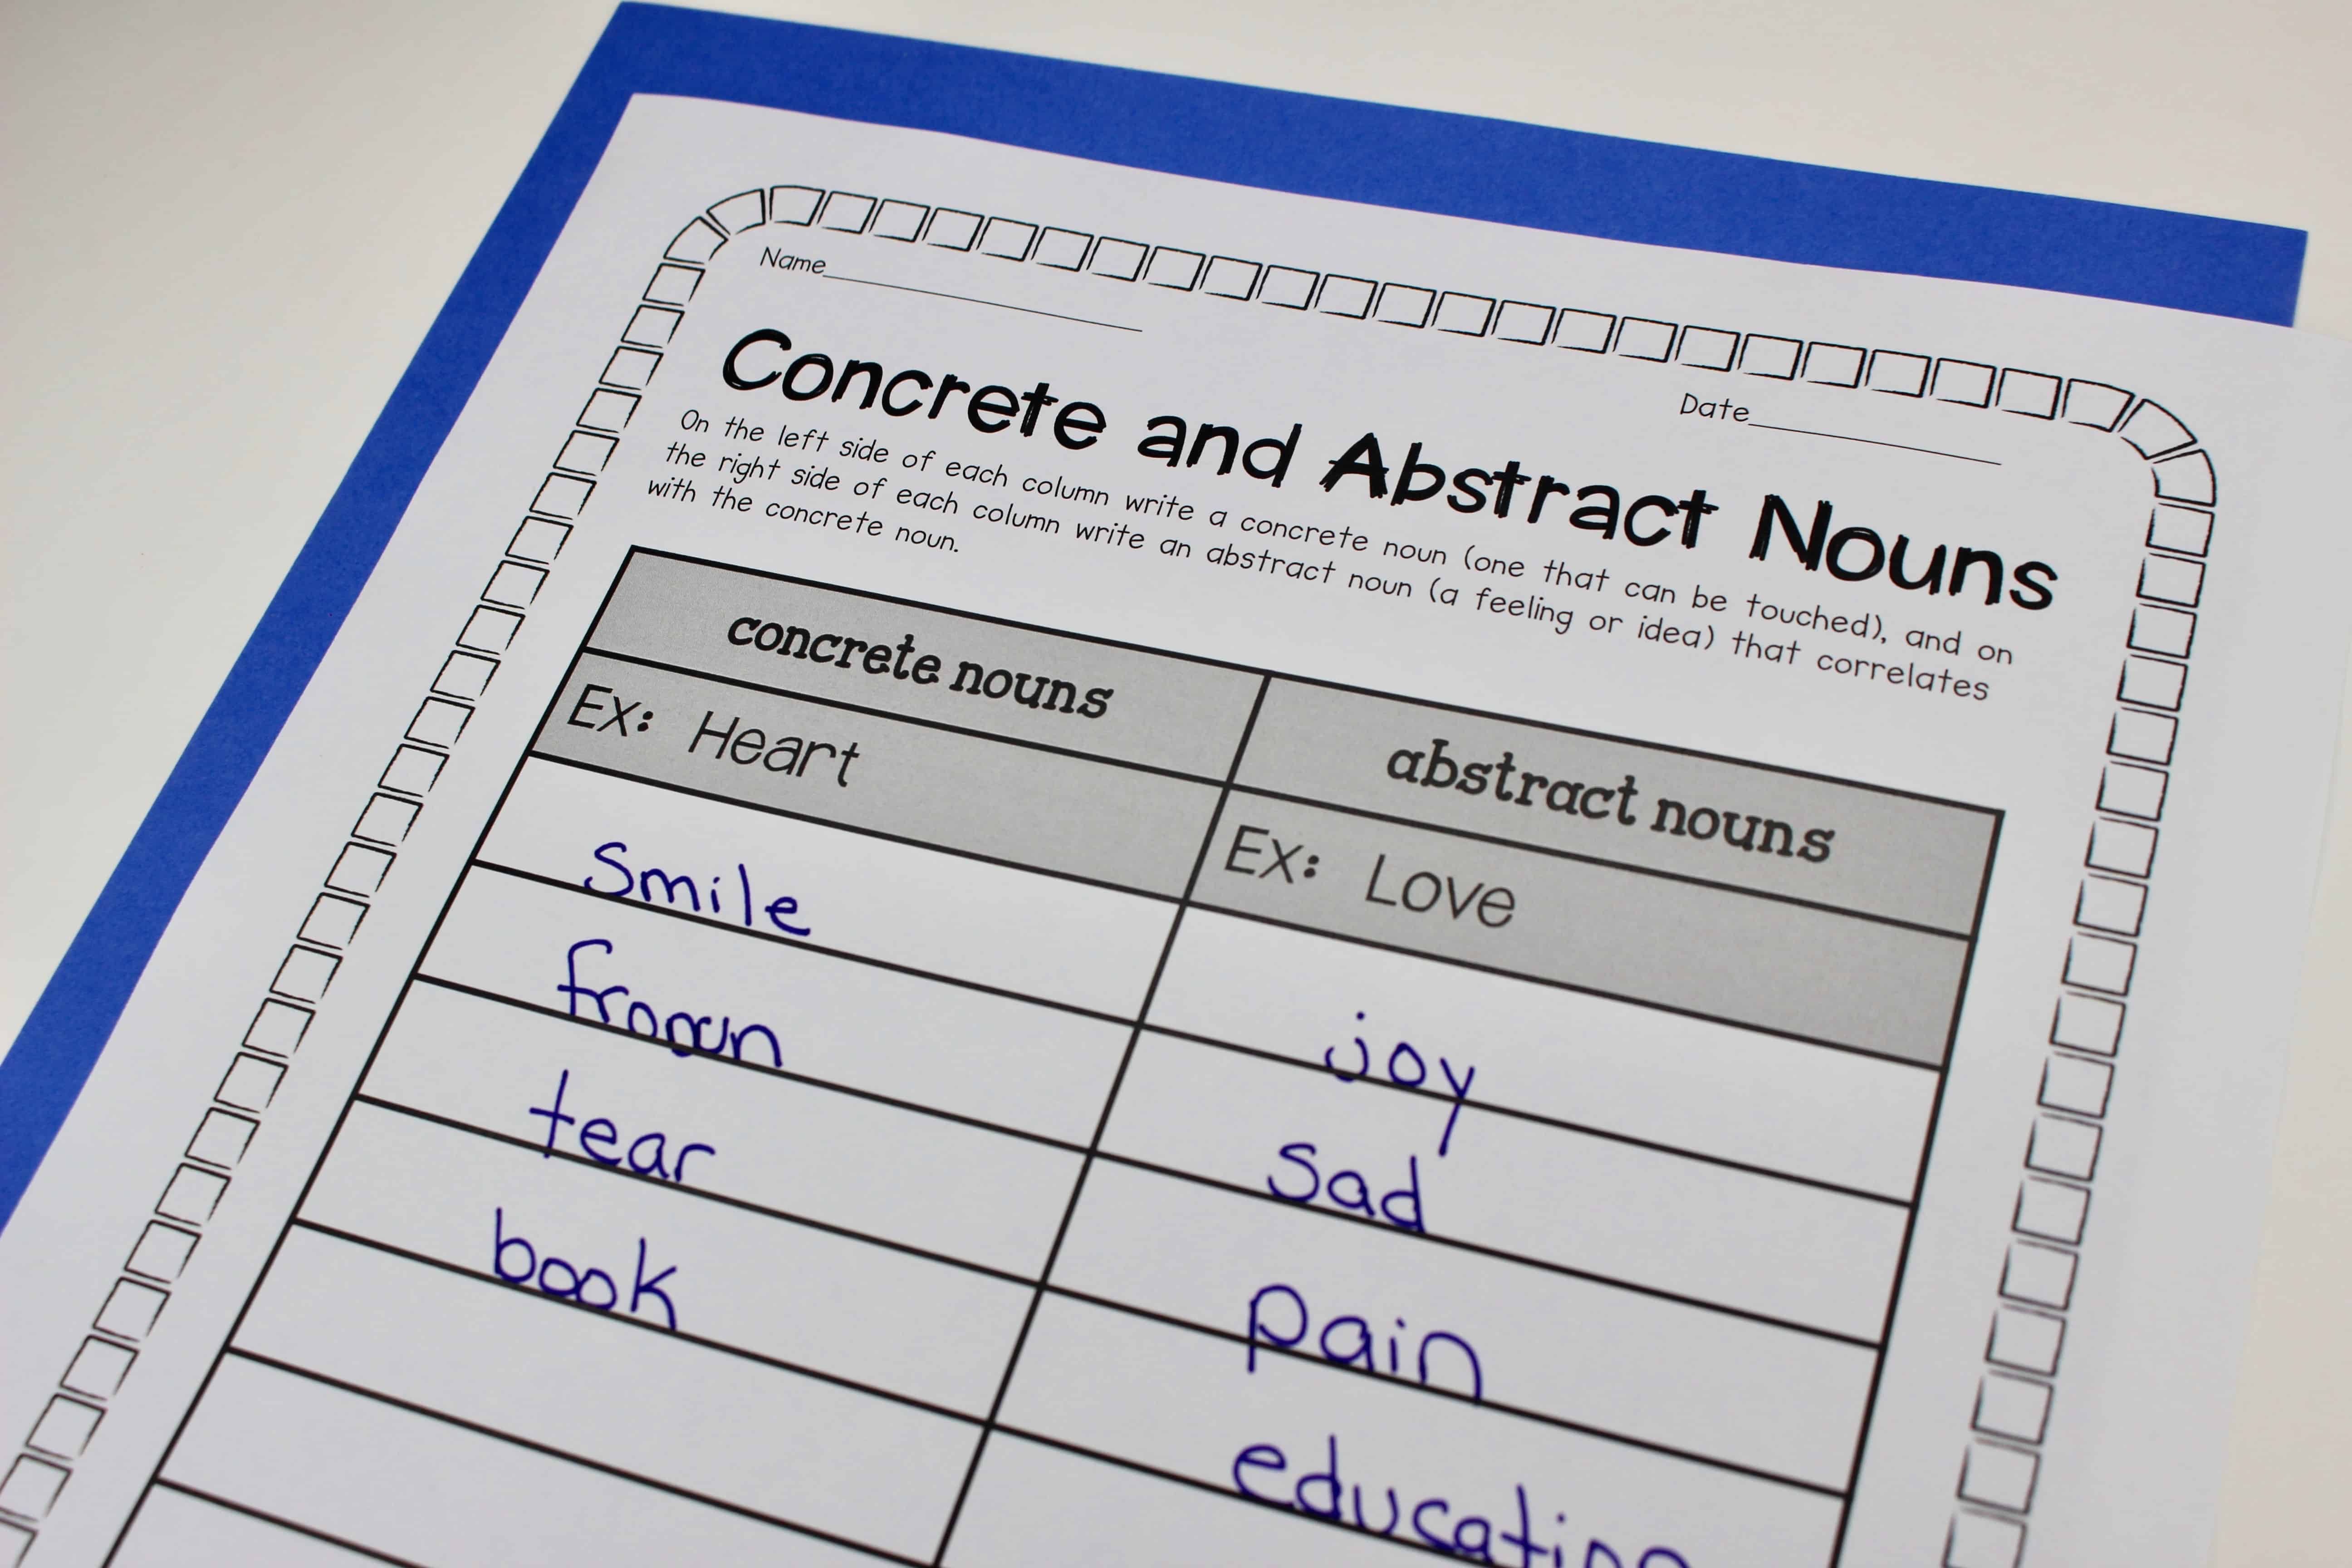 Grammar is usually most people's least favorite subject and topic, which is understandable. If you struggle with teaching nouns, then you'll want to read this blog post, where I'm sharing lots of tips for teaching nouns in fun and engaging ways that will catch -- and keep -- students' attention! Click through to read the full post for upper elementary teachers.